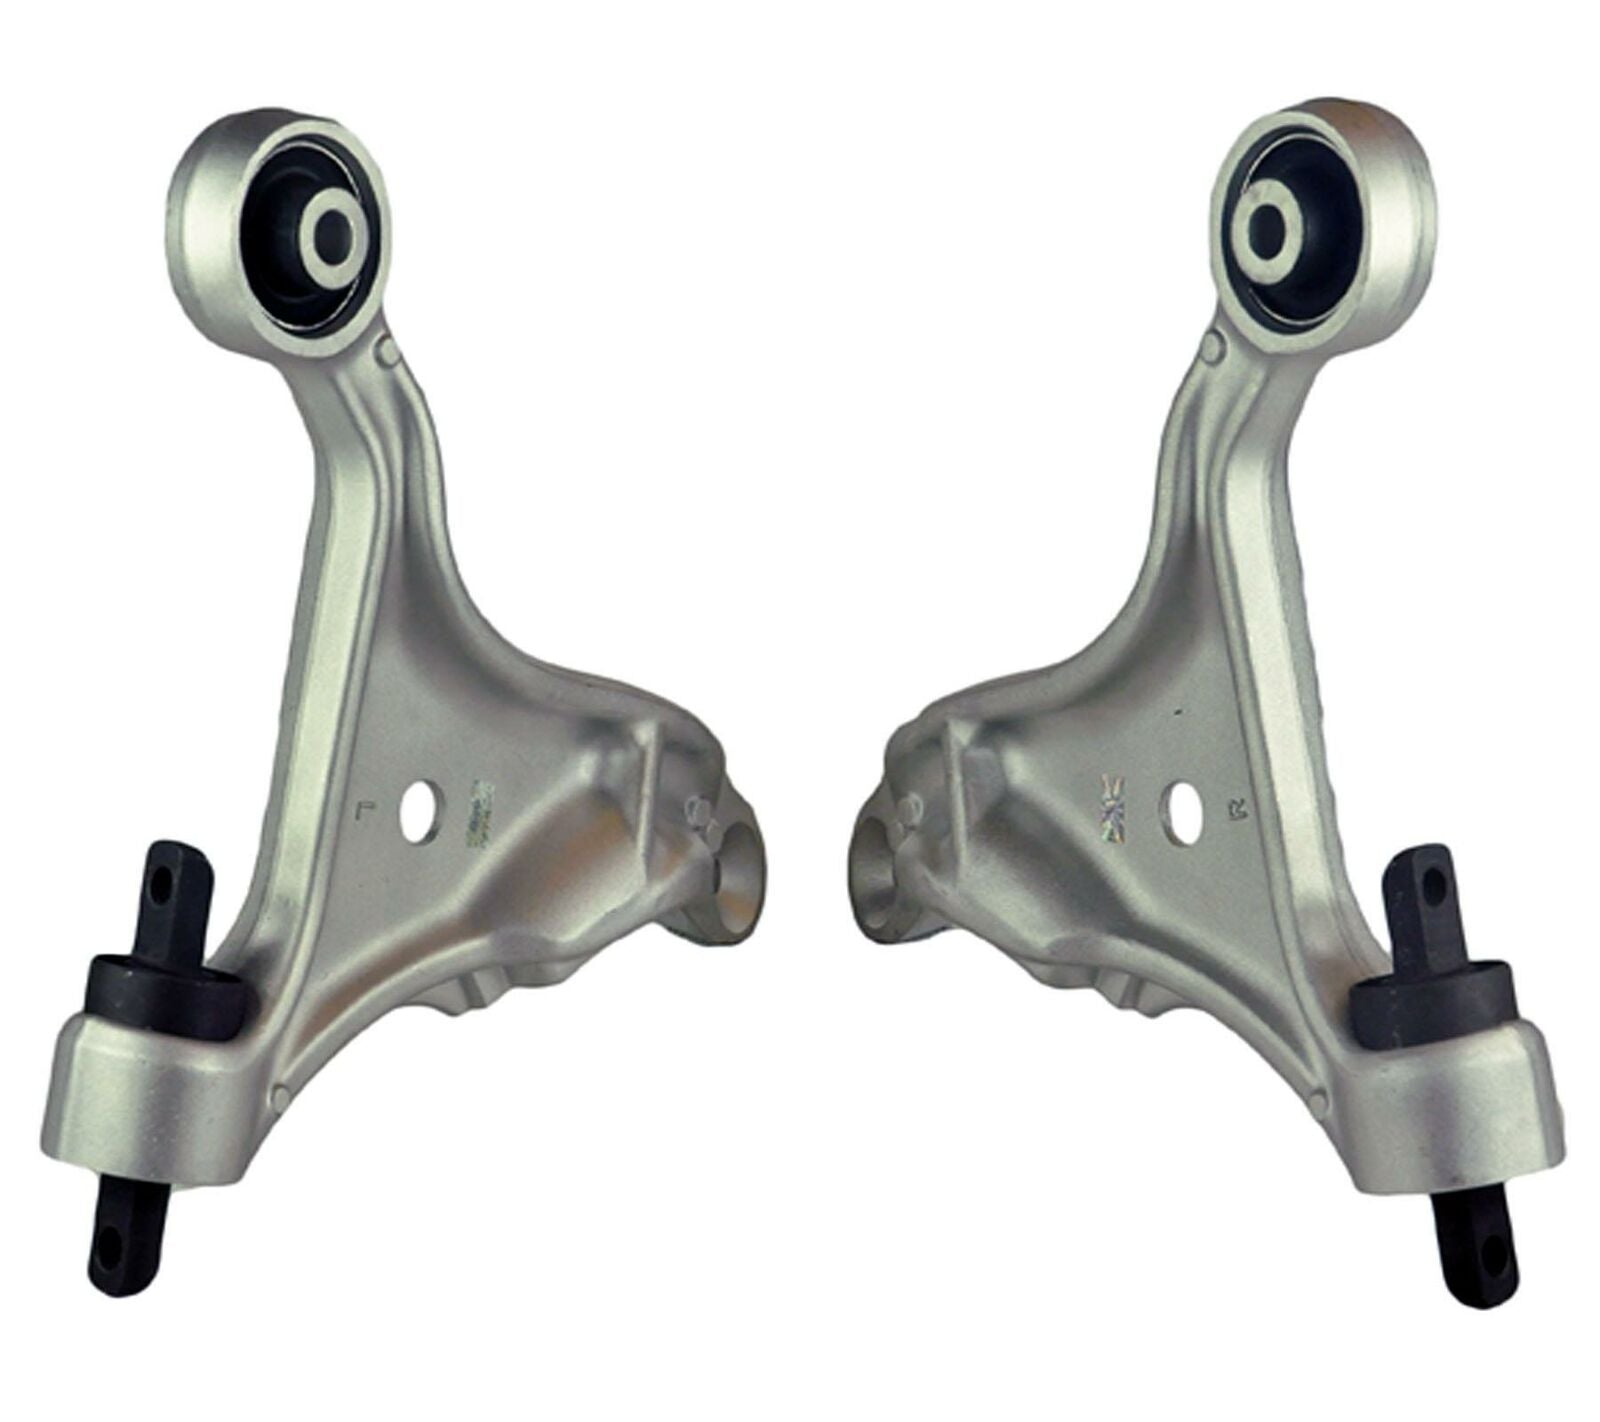 Pair Of Front Lower Suspension Wishbone Track Control Arms With Bushes For Volvo S60, V70 8623957